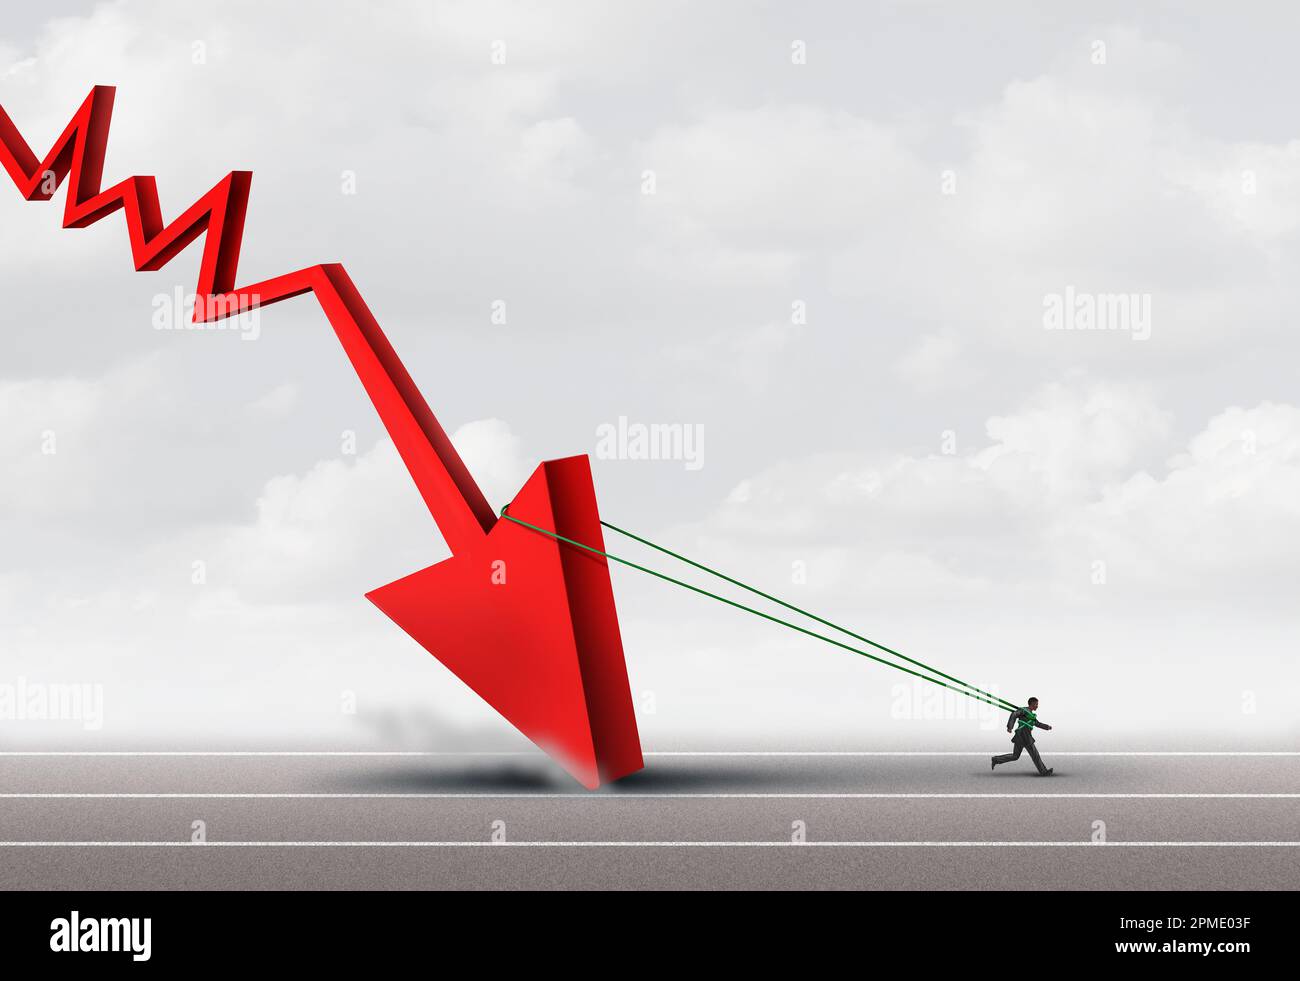 Recession distress burden business concept as a burdened businessman or employee pulling a heavy downward arrow as a symbol for downturn stress Stock Photo